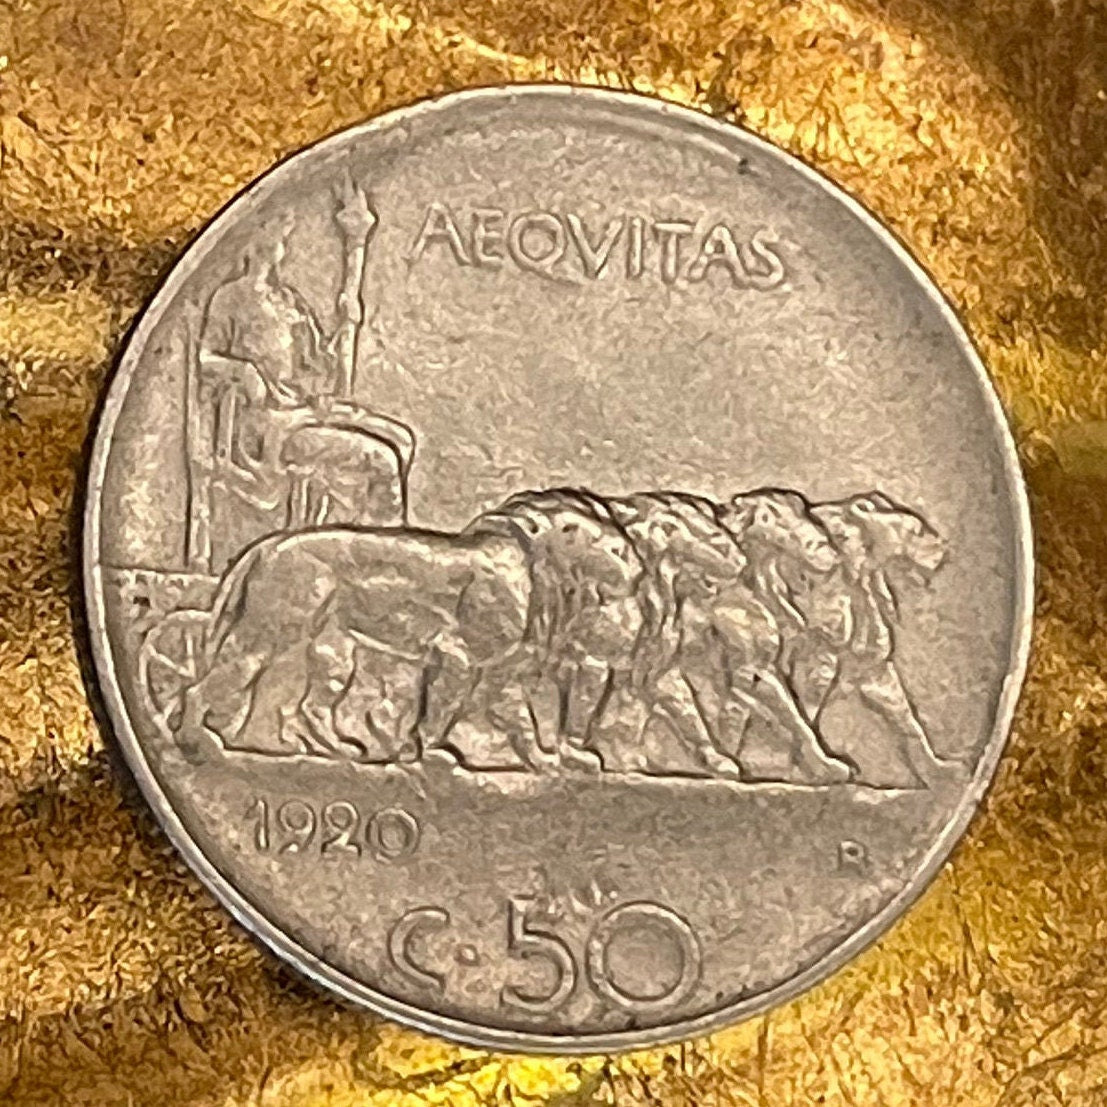 Goddess Aequitas in 4-Lion Chariot 50 Centesimi Italy Authentic Coin Money for Jewelry (King Vittorio Emanuele III) (Goddess of Equity)